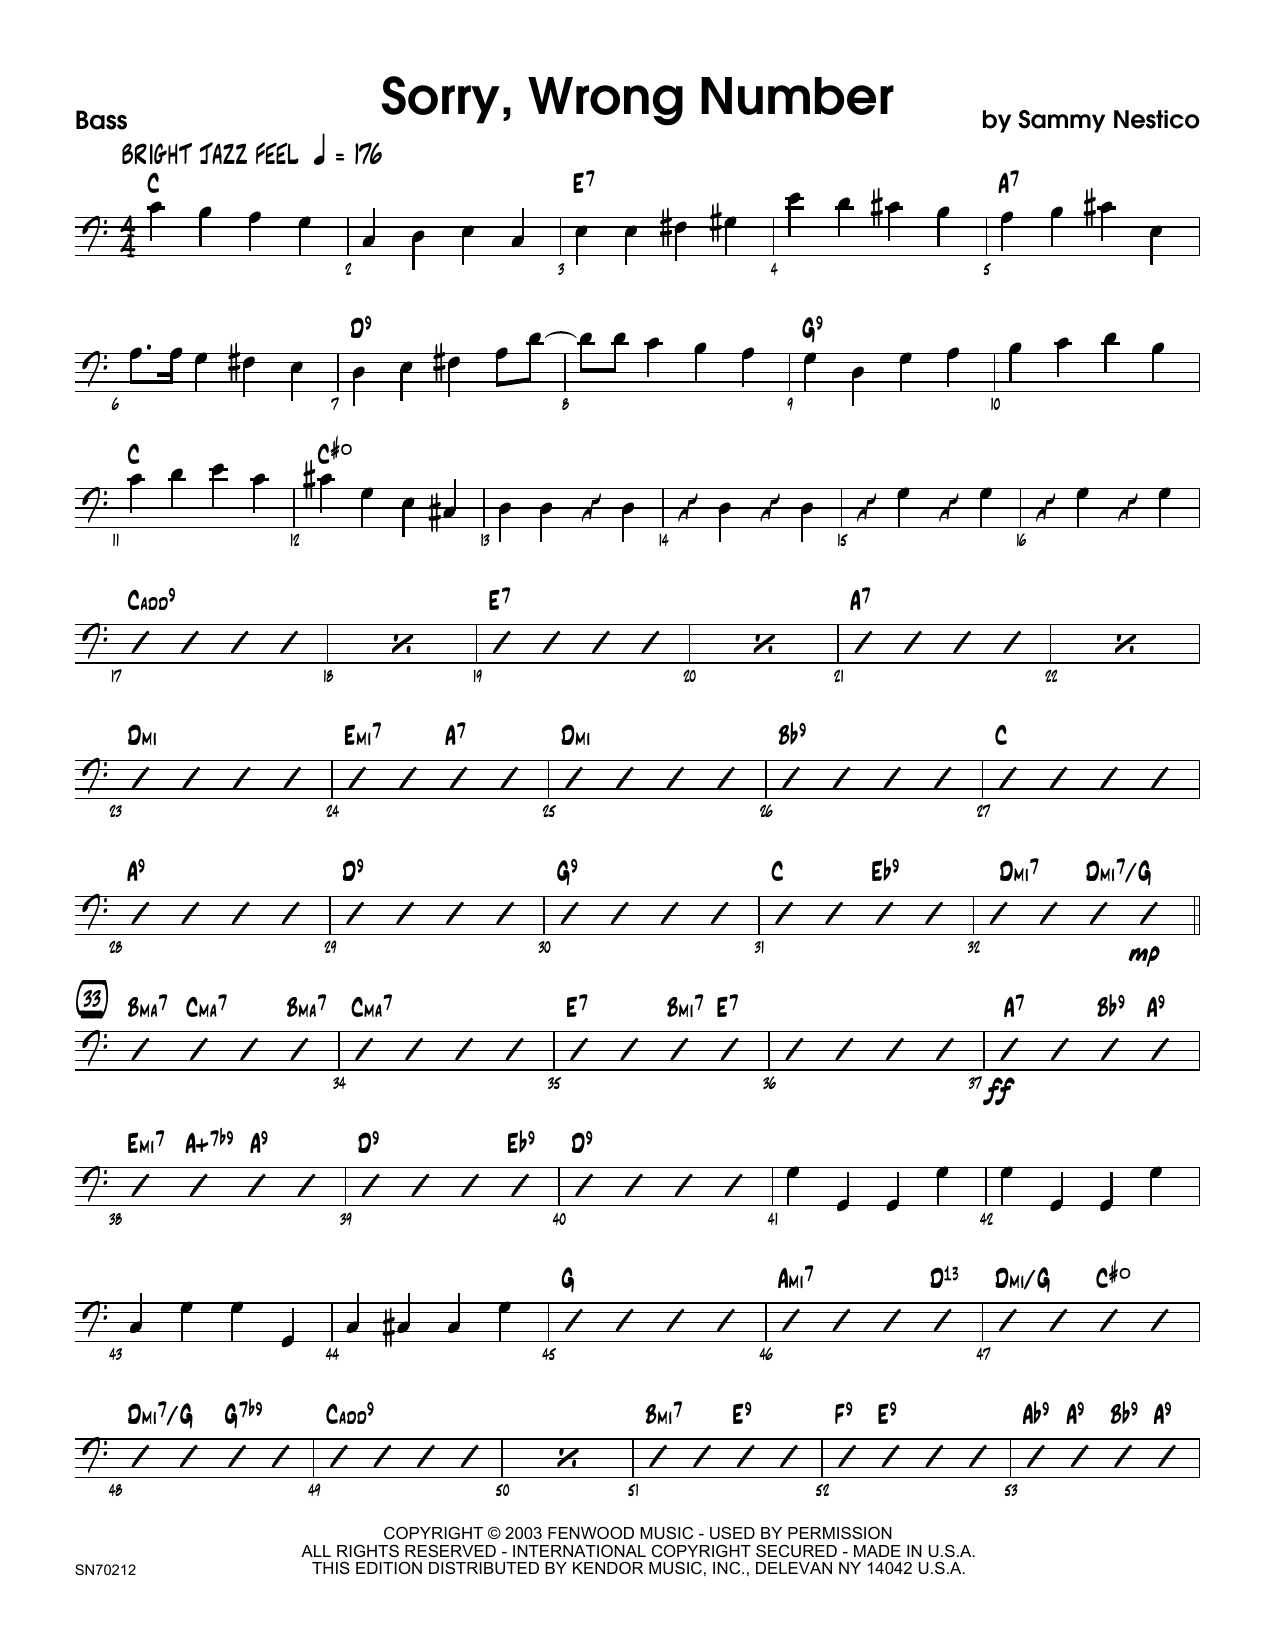 Download Sammy Nestico Sorry, Wrong Number - Bass Sheet Music